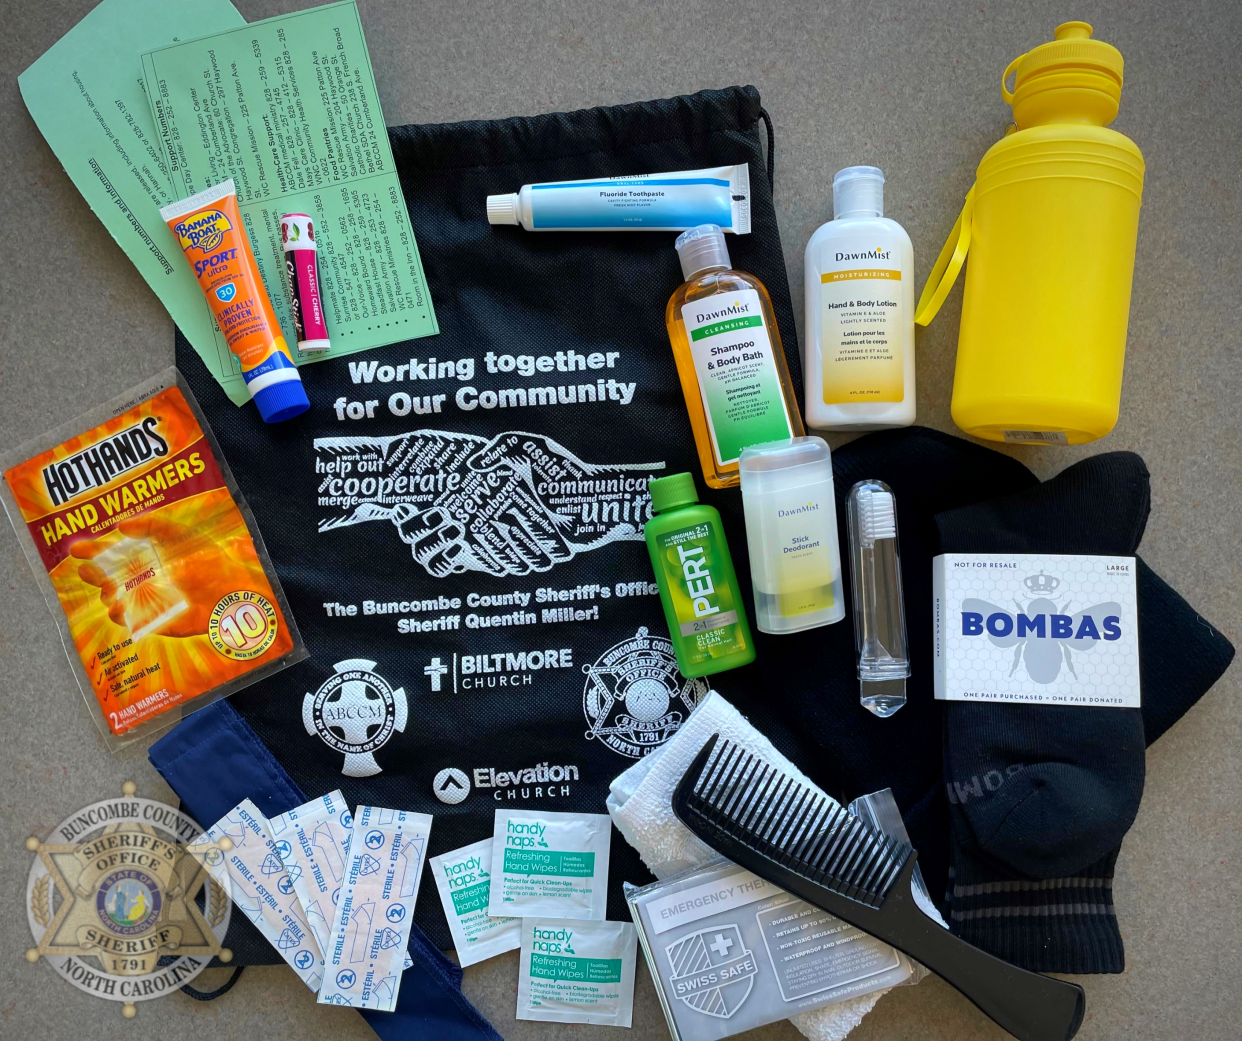 One of the care kits put together by the Buncombe County Sheriff's Office.